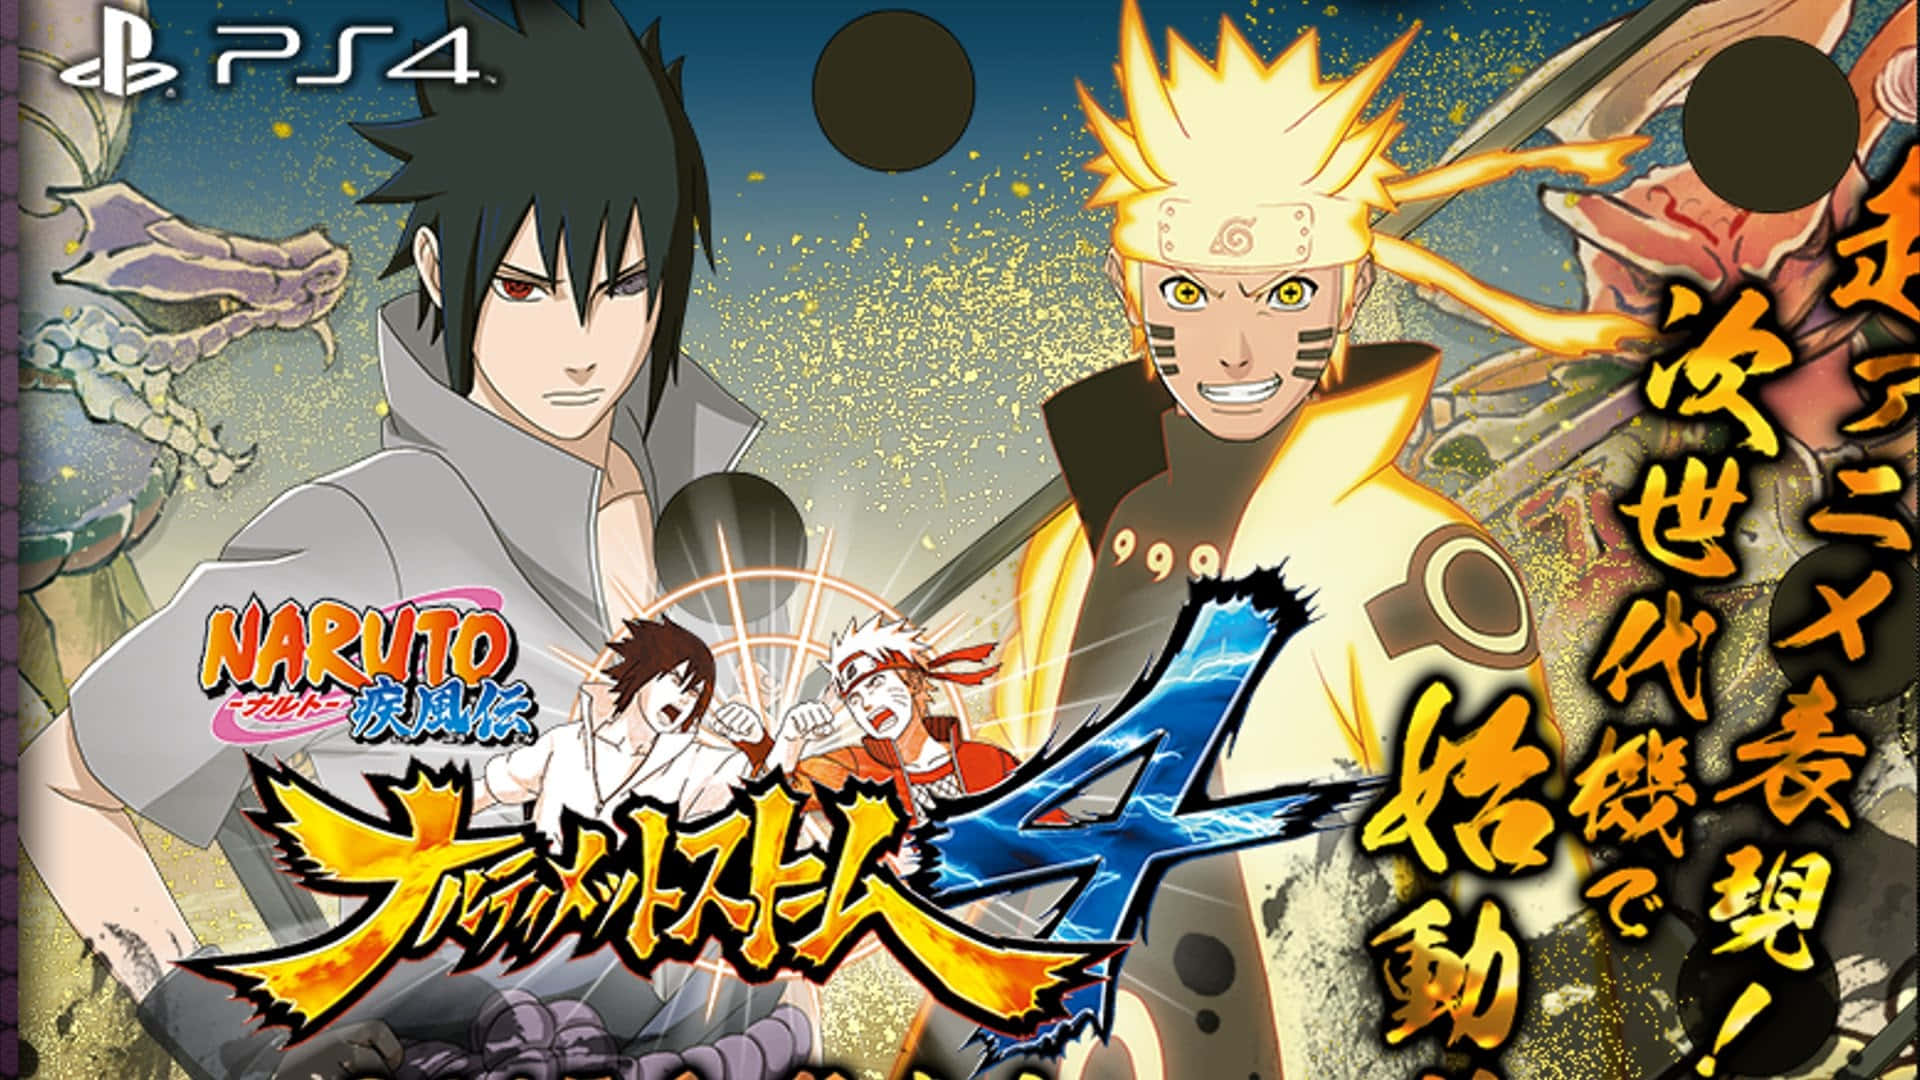 Play your favorite Naruto game on Playstation 4! Wallpaper